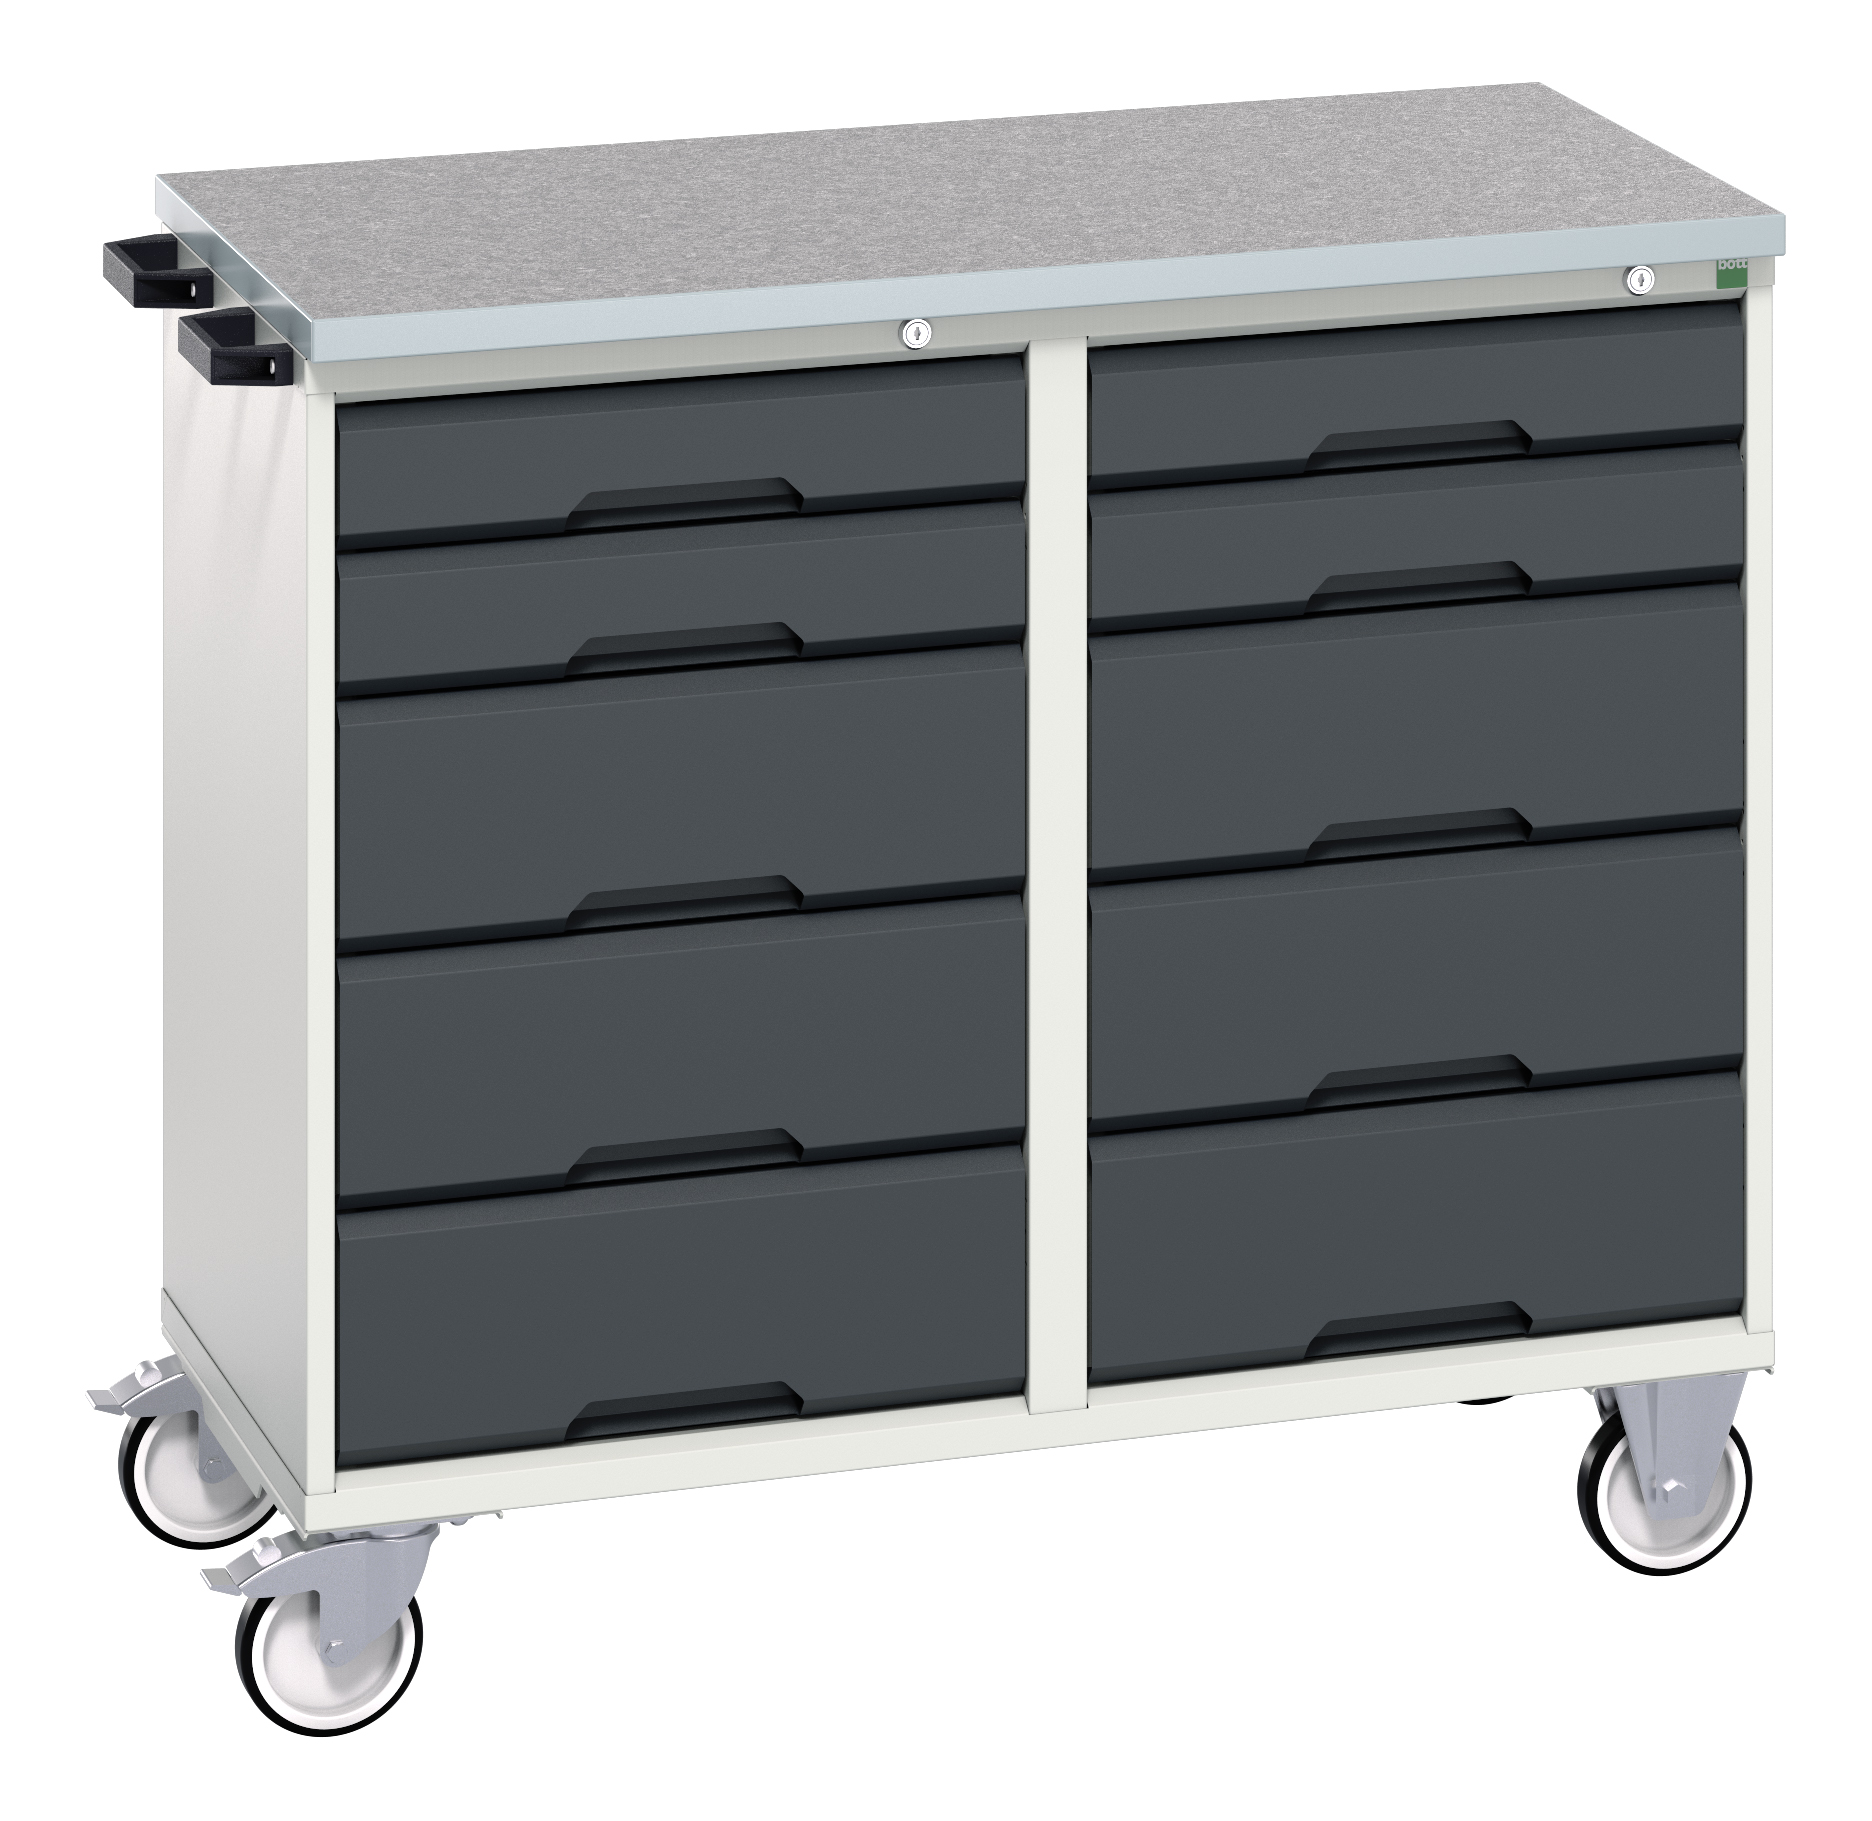 Bott Verso Maintenance Trolley With 10 Drawers & Lino Top - 16927100.19